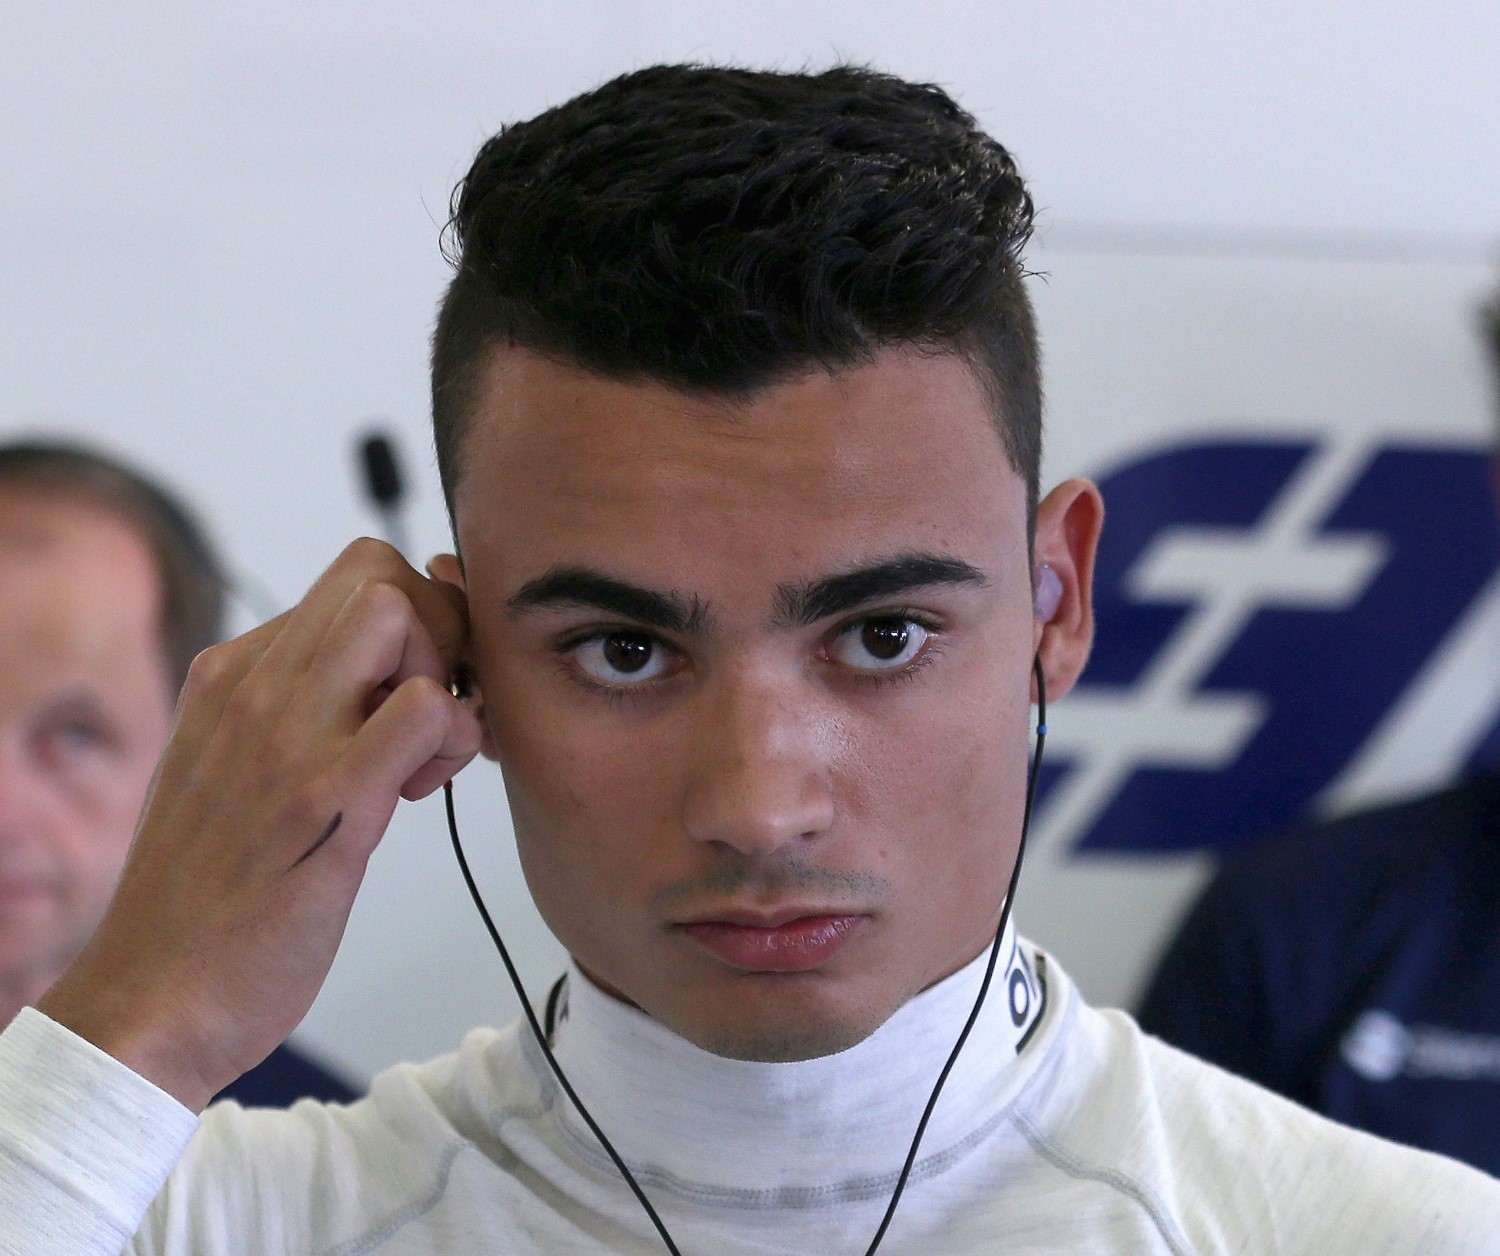 If Wehrlein was fast enough, Wolff would have paid to put him in the 2nd Williams seat